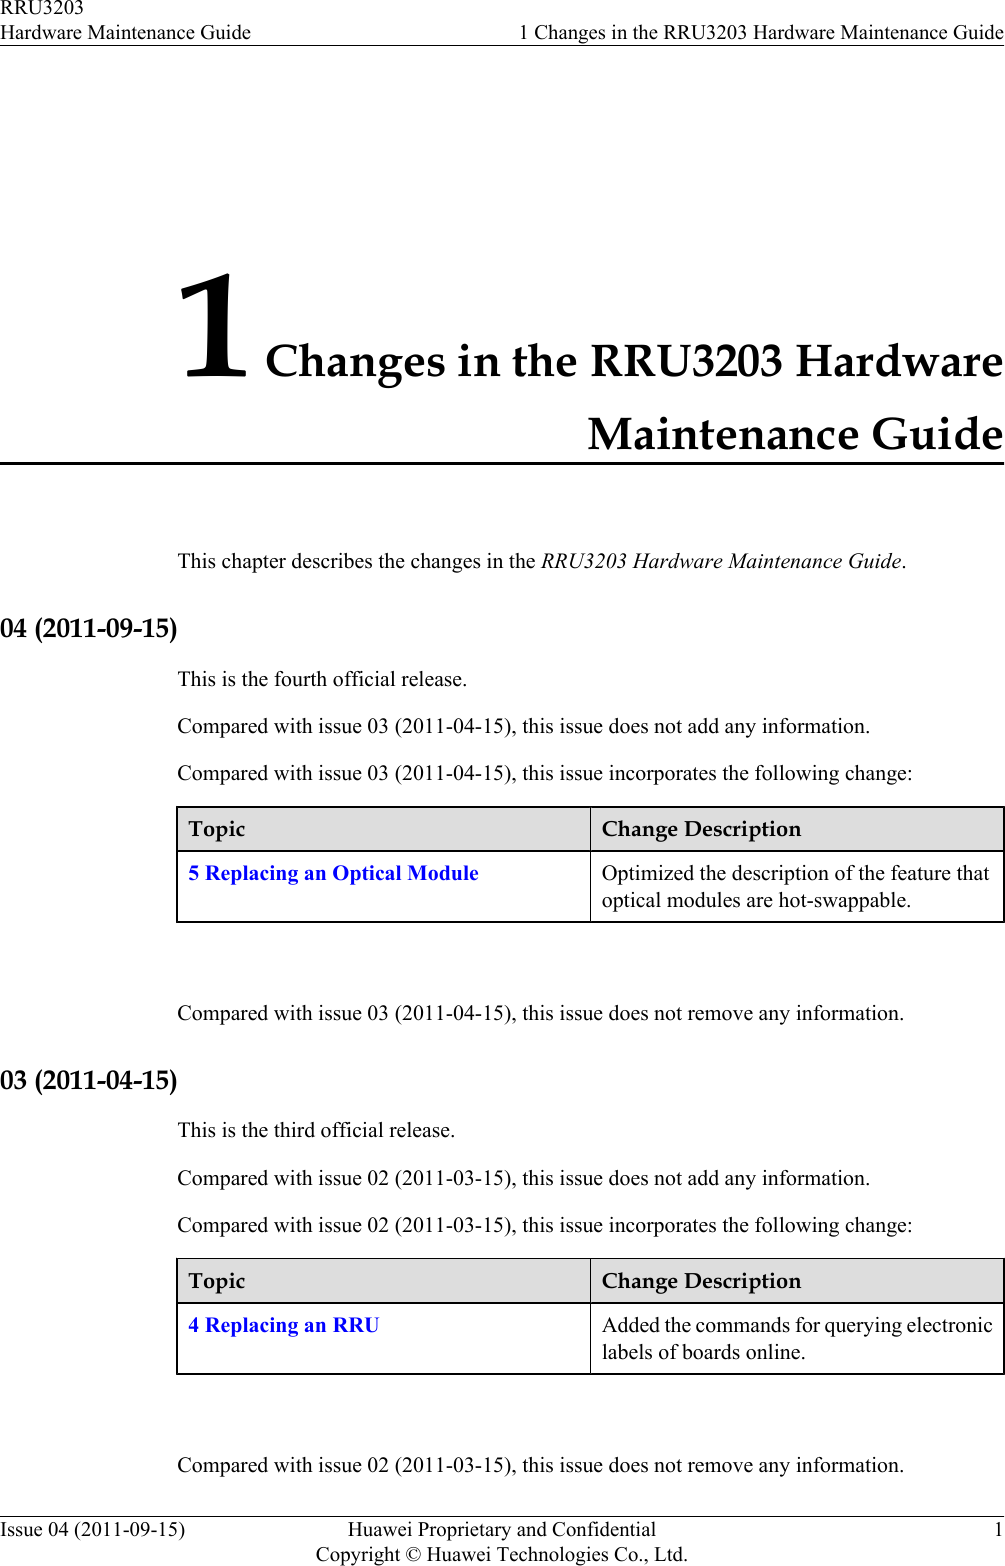 1 Changes in the RRU3203 HardwareMaintenance GuideThis chapter describes the changes in the RRU3203 Hardware Maintenance Guide.04 (2011-09-15)This is the fourth official release.Compared with issue 03 (2011-04-15), this issue does not add any information.Compared with issue 03 (2011-04-15), this issue incorporates the following change:Topic Change Description5 Replacing an Optical Module Optimized the description of the feature thatoptical modules are hot-swappable. Compared with issue 03 (2011-04-15), this issue does not remove any information.03 (2011-04-15)This is the third official release.Compared with issue 02 (2011-03-15), this issue does not add any information.Compared with issue 02 (2011-03-15), this issue incorporates the following change:Topic Change Description4 Replacing an RRU Added the commands for querying electroniclabels of boards online. Compared with issue 02 (2011-03-15), this issue does not remove any information.RRU3203Hardware Maintenance Guide 1 Changes in the RRU3203 Hardware Maintenance GuideIssue 04 (2011-09-15) Huawei Proprietary and ConfidentialCopyright © Huawei Technologies Co., Ltd.1